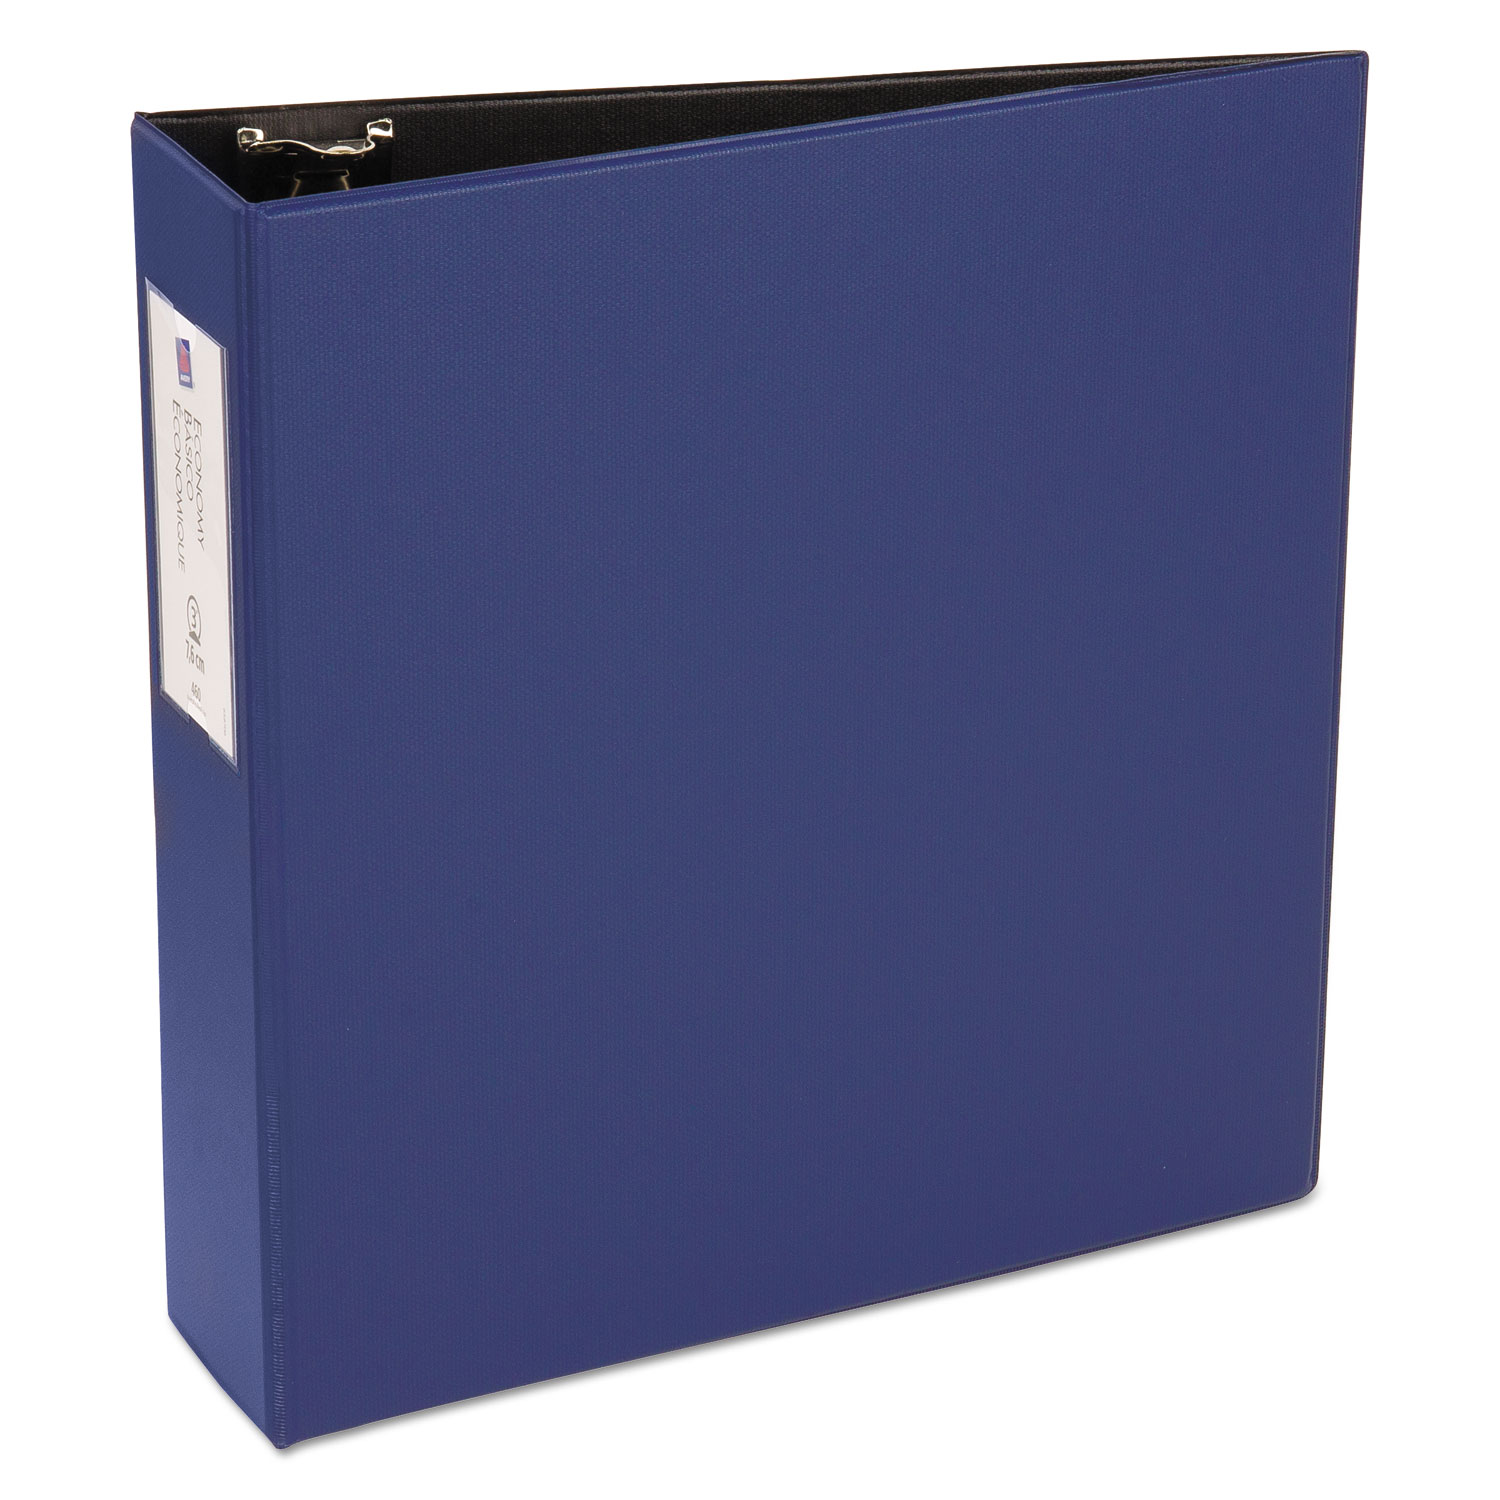  Avery 04600 Economy Non-View Binder with Round Rings, 3 Rings, 3 Capacity, 11 x 8.5, Blue (AVE04600) 